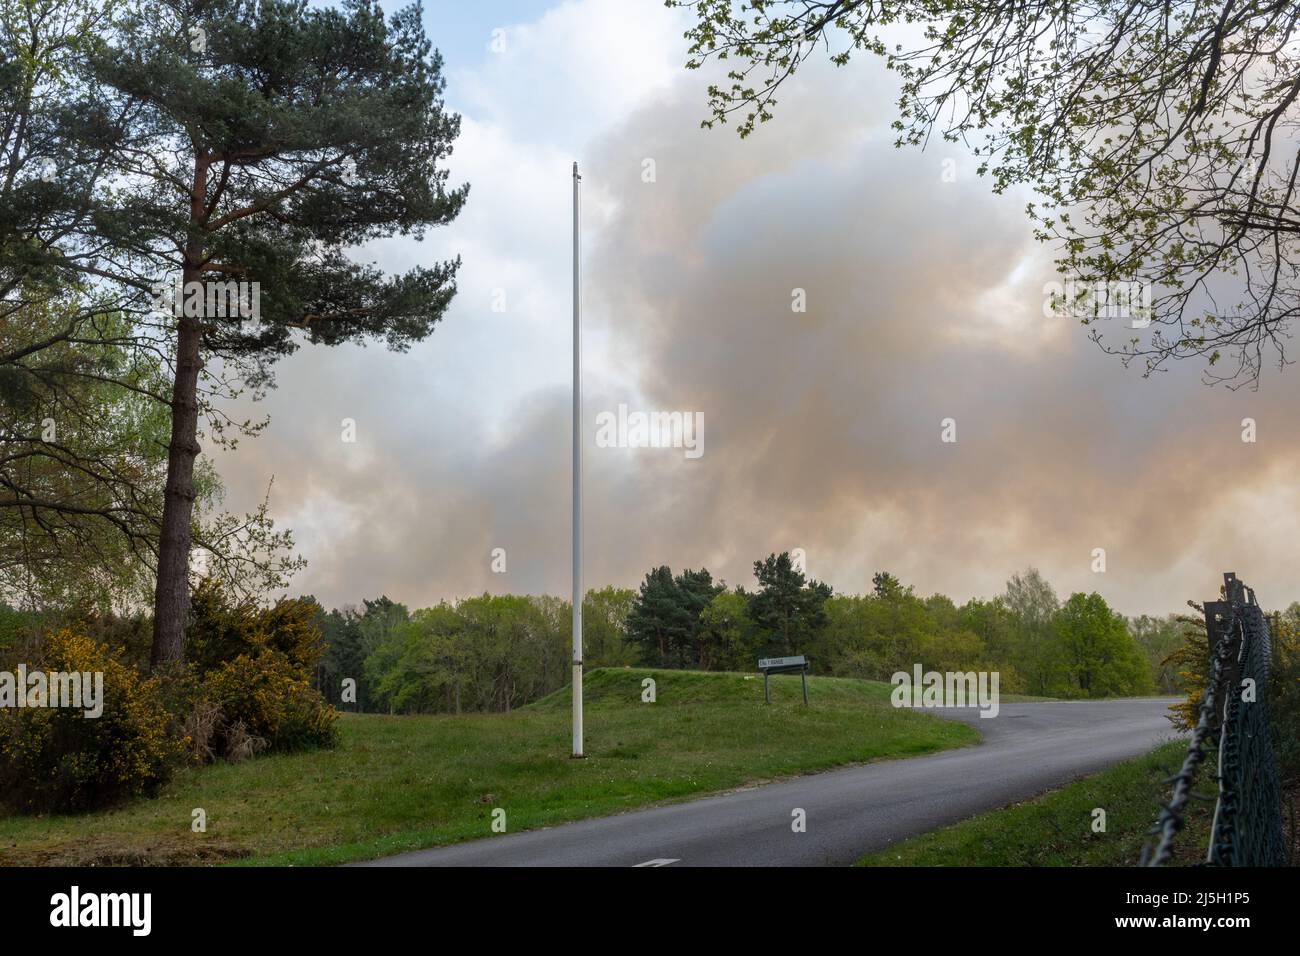 Ash Ranges, Surrey, England, UK. 23rd April 2022. A large heath fire has broken out on Ash Ranges, which a heathland nature reserve west of Pirbright in Surrey. It is owned by the Ministry of Defence and managed by the Surrey Wildlife Trust. Stock Photo